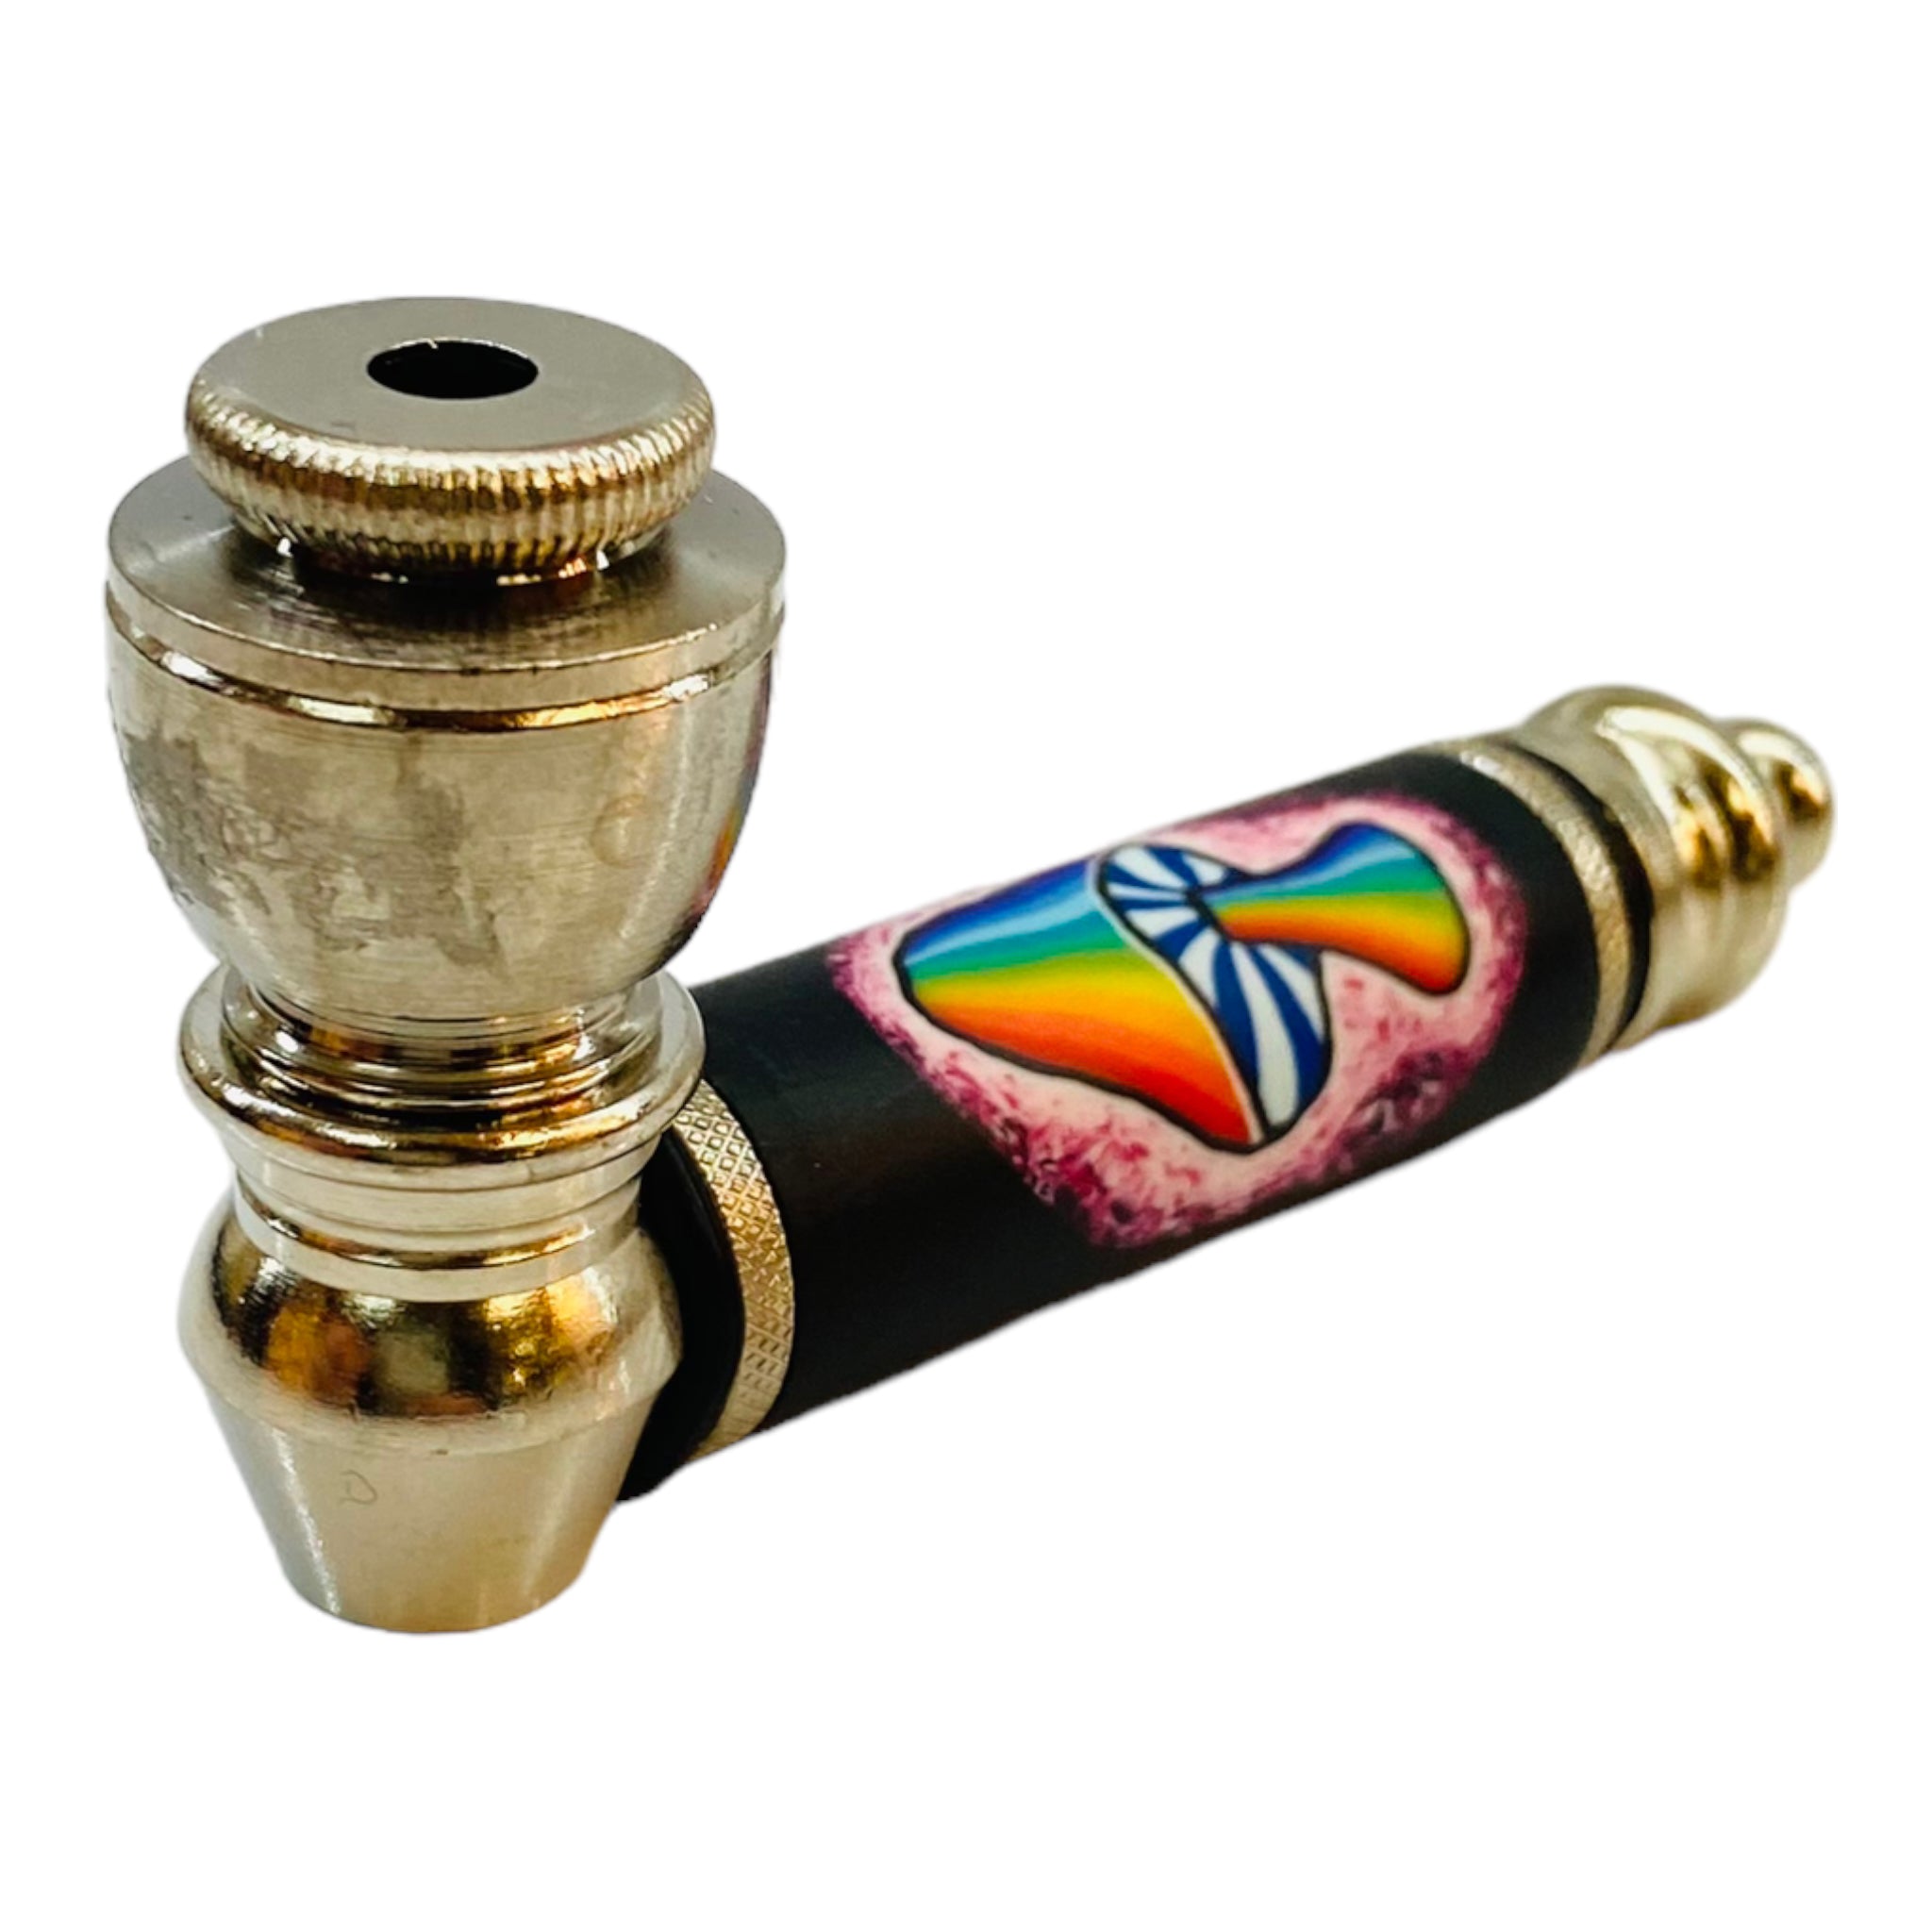 Metal Hand Pipes - Silver Chrome Hand Pipe With Magical Rainbow Mushroom